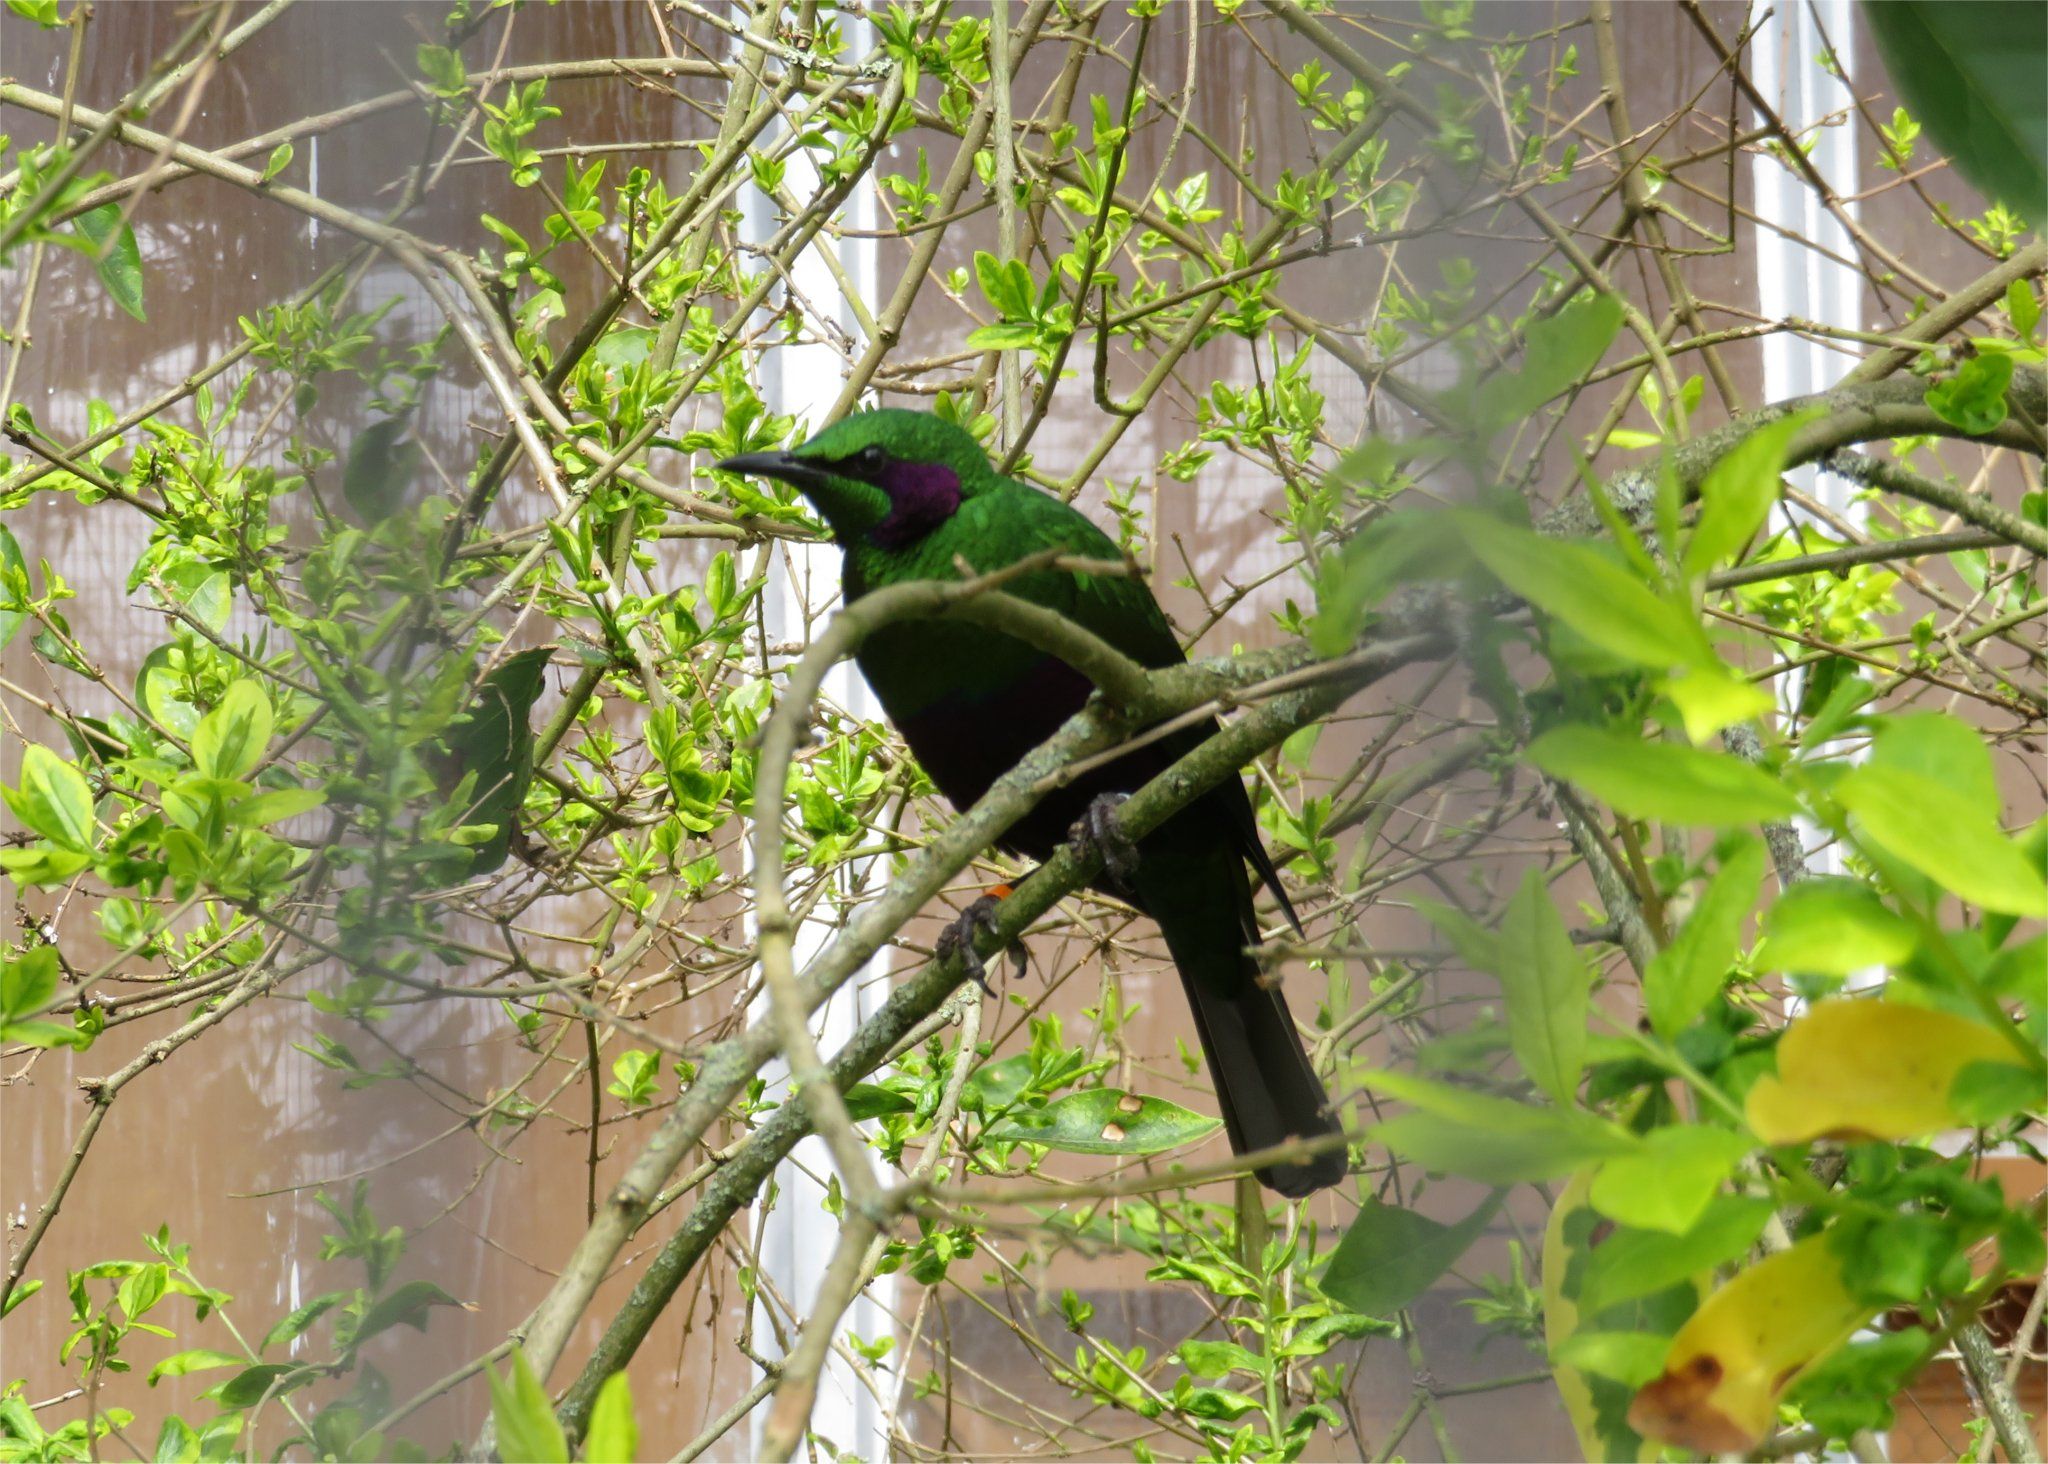 Image of Emerald Starling